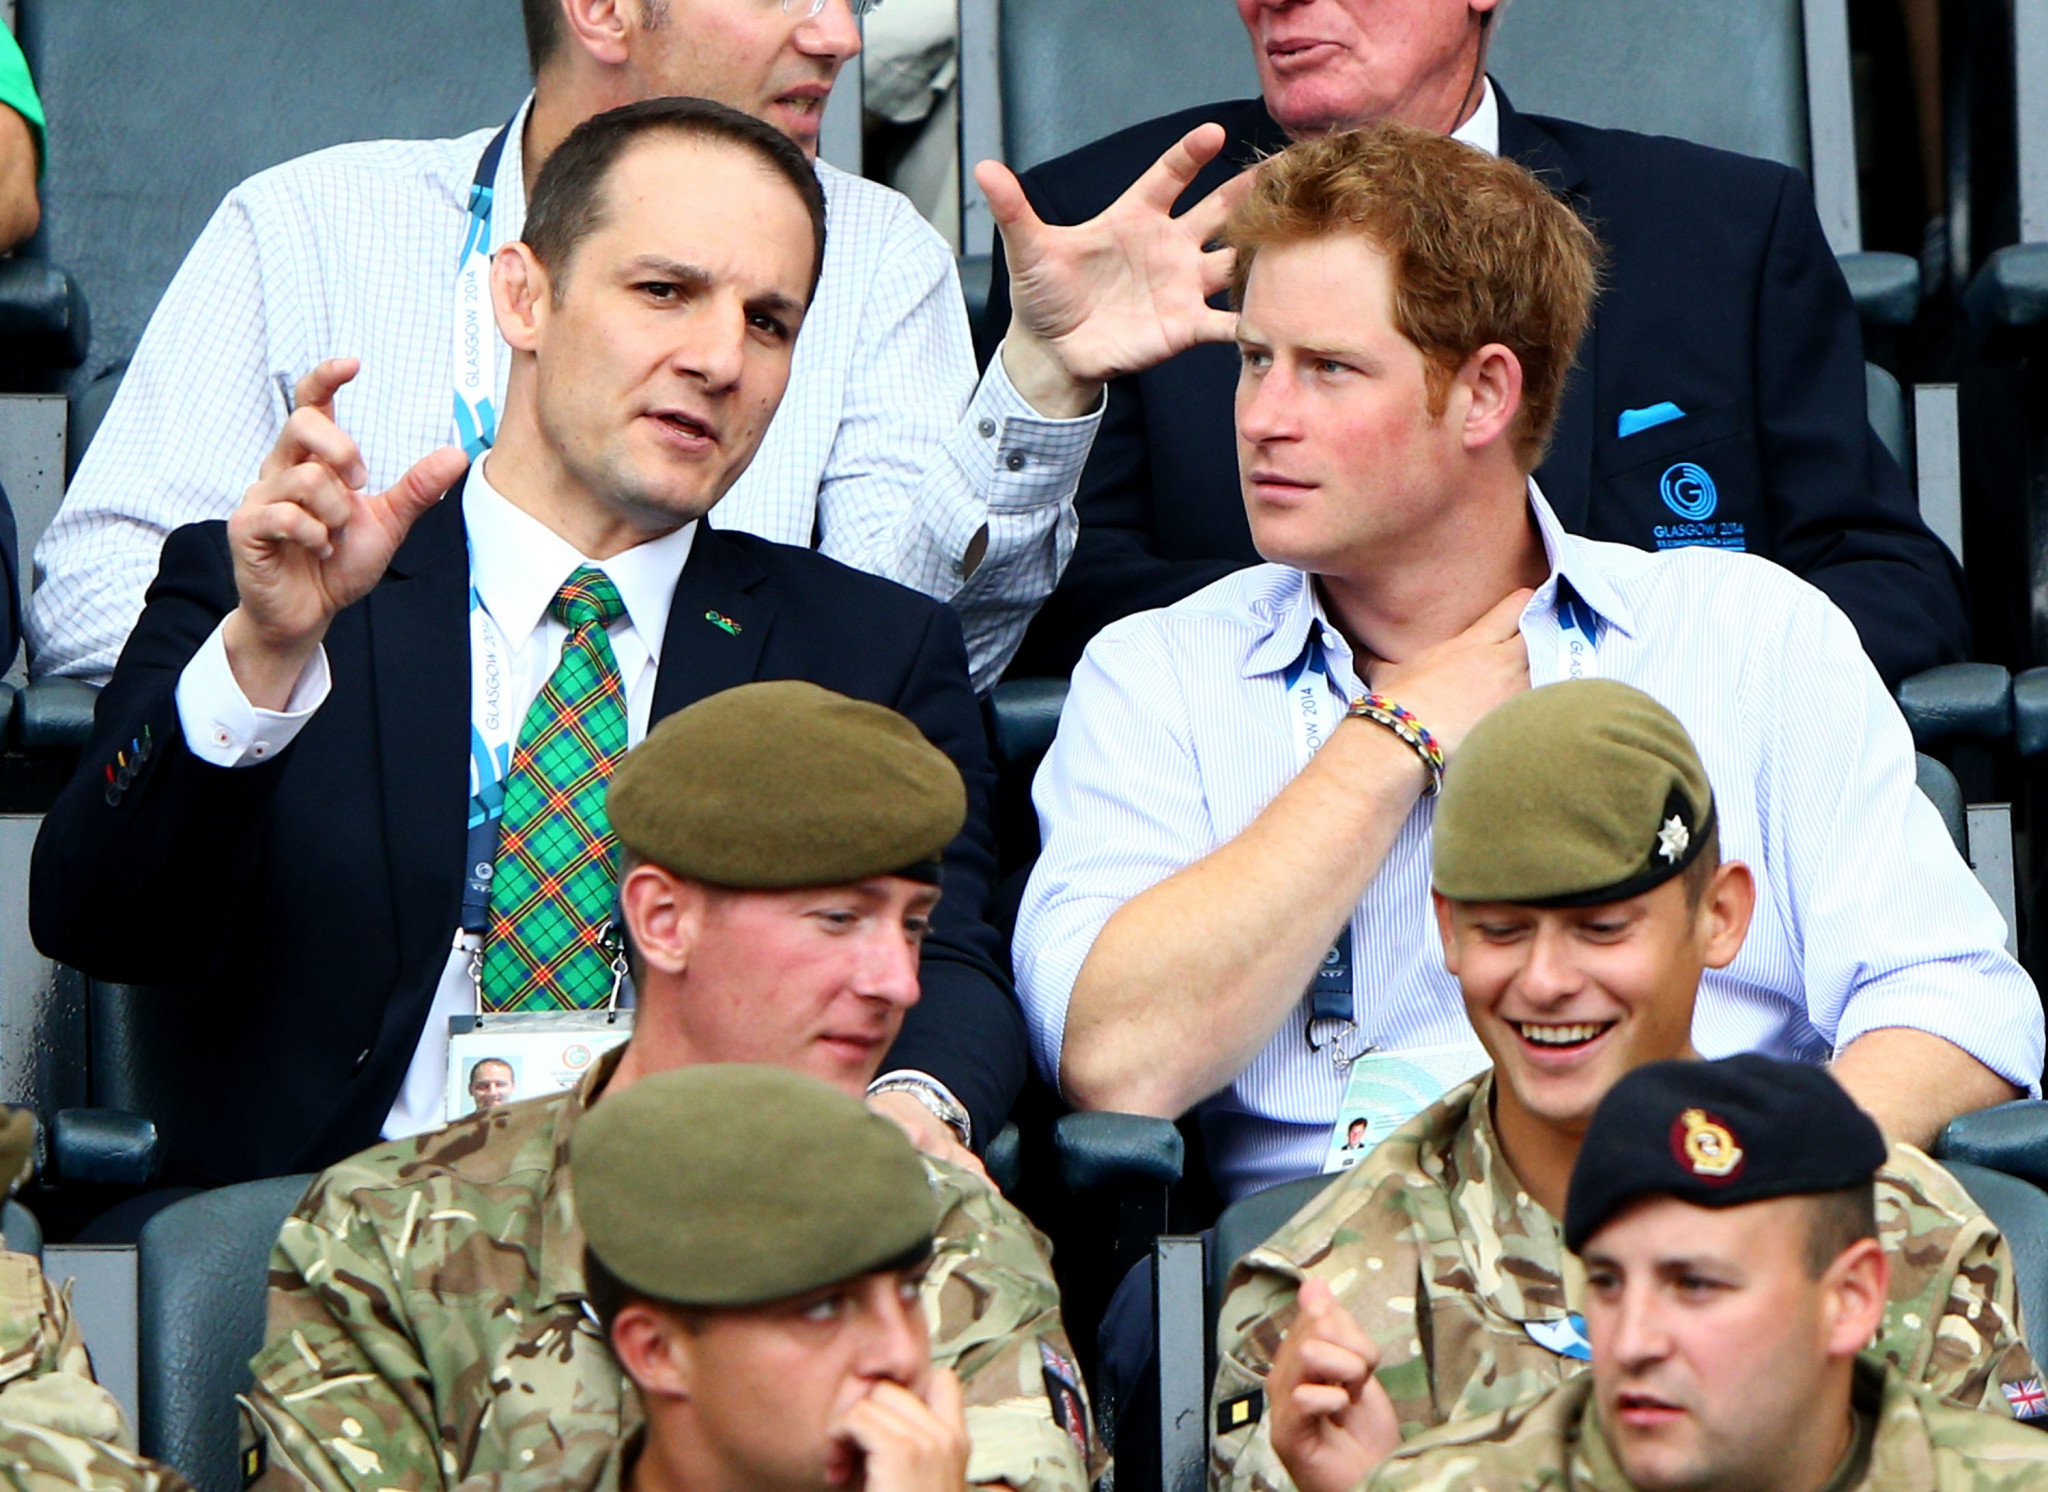 Prince Harry visited the 2014 Commonwealth Games in Glagsow, where he met David Grevemberg, now chief executive of the CGF, and could be at Gold Coast 2018 ©Getty Images